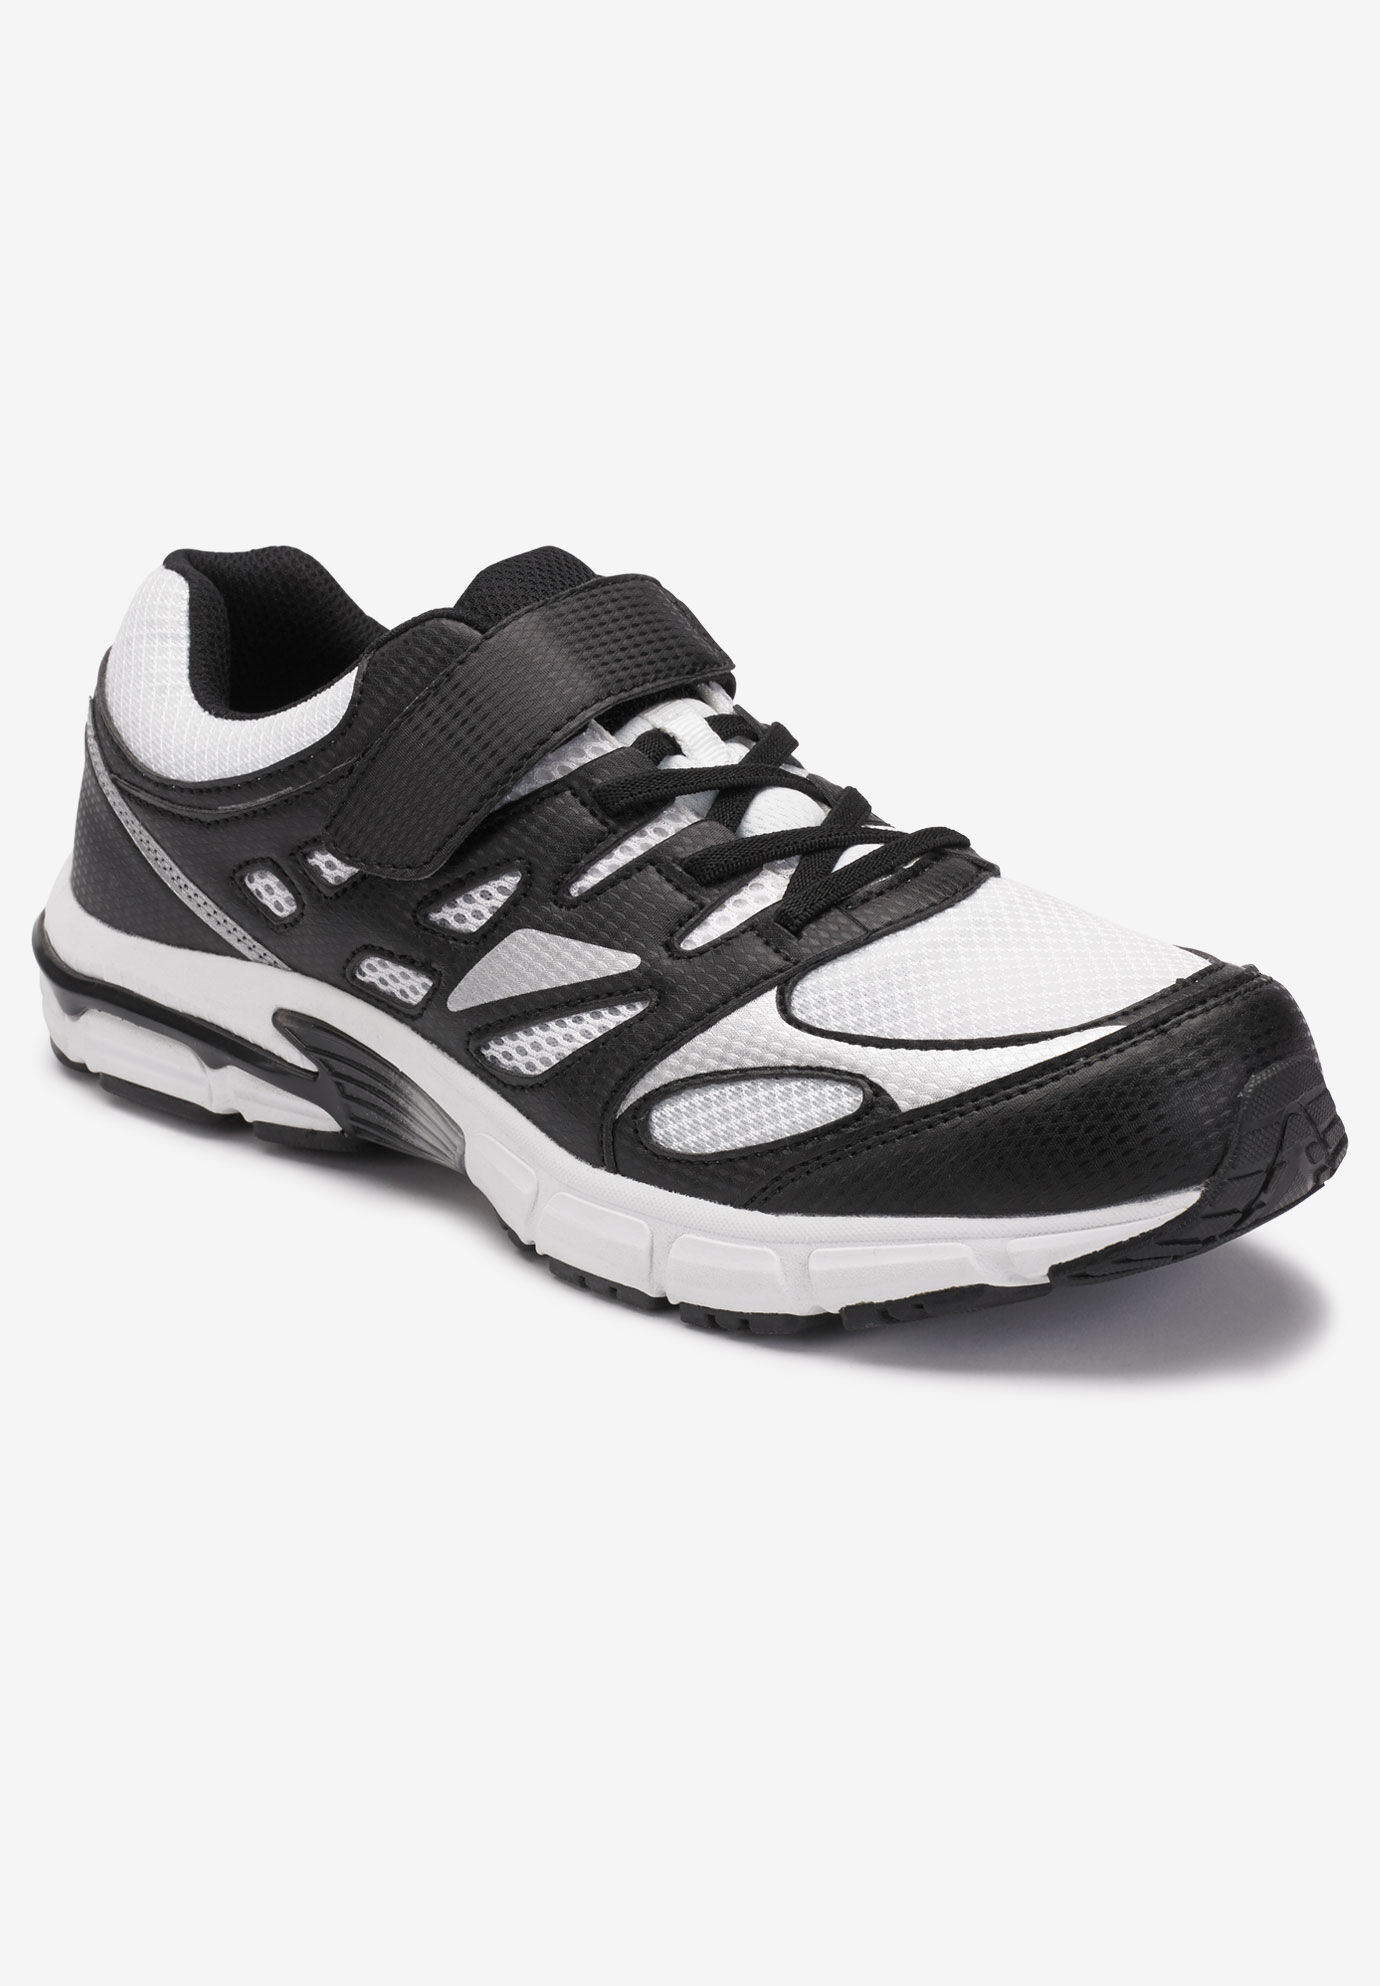 skechers mens shoes size 15 Sale,up to 